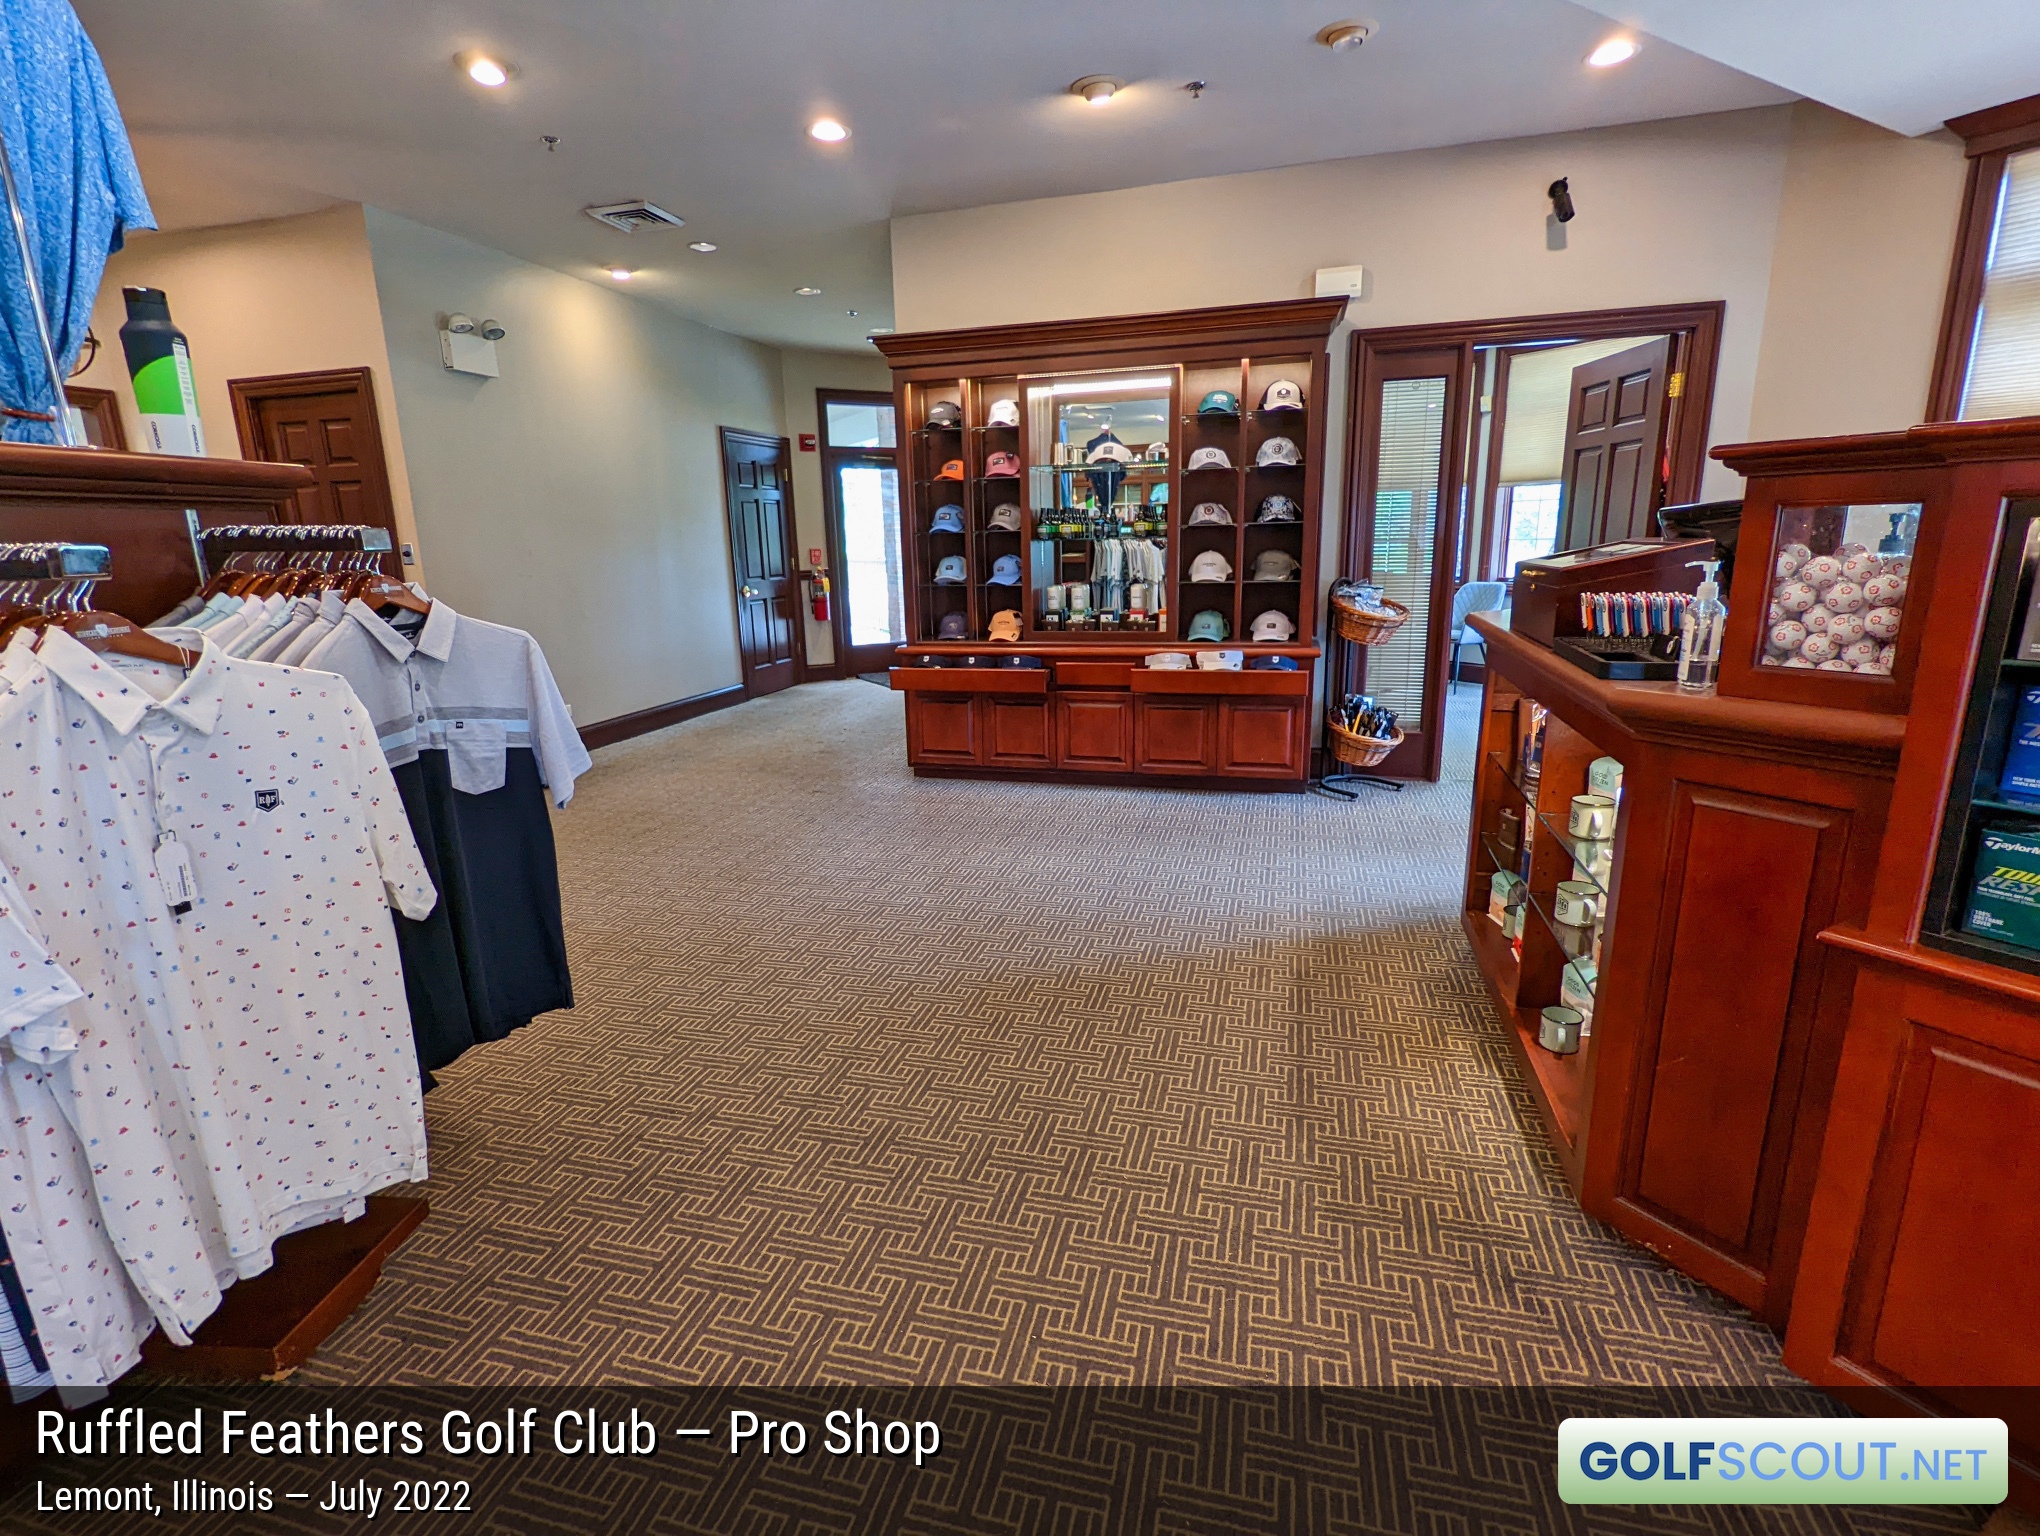 Photo of the pro shop at Ruffled Feathers Golf Club in Lemont, Illinois. 